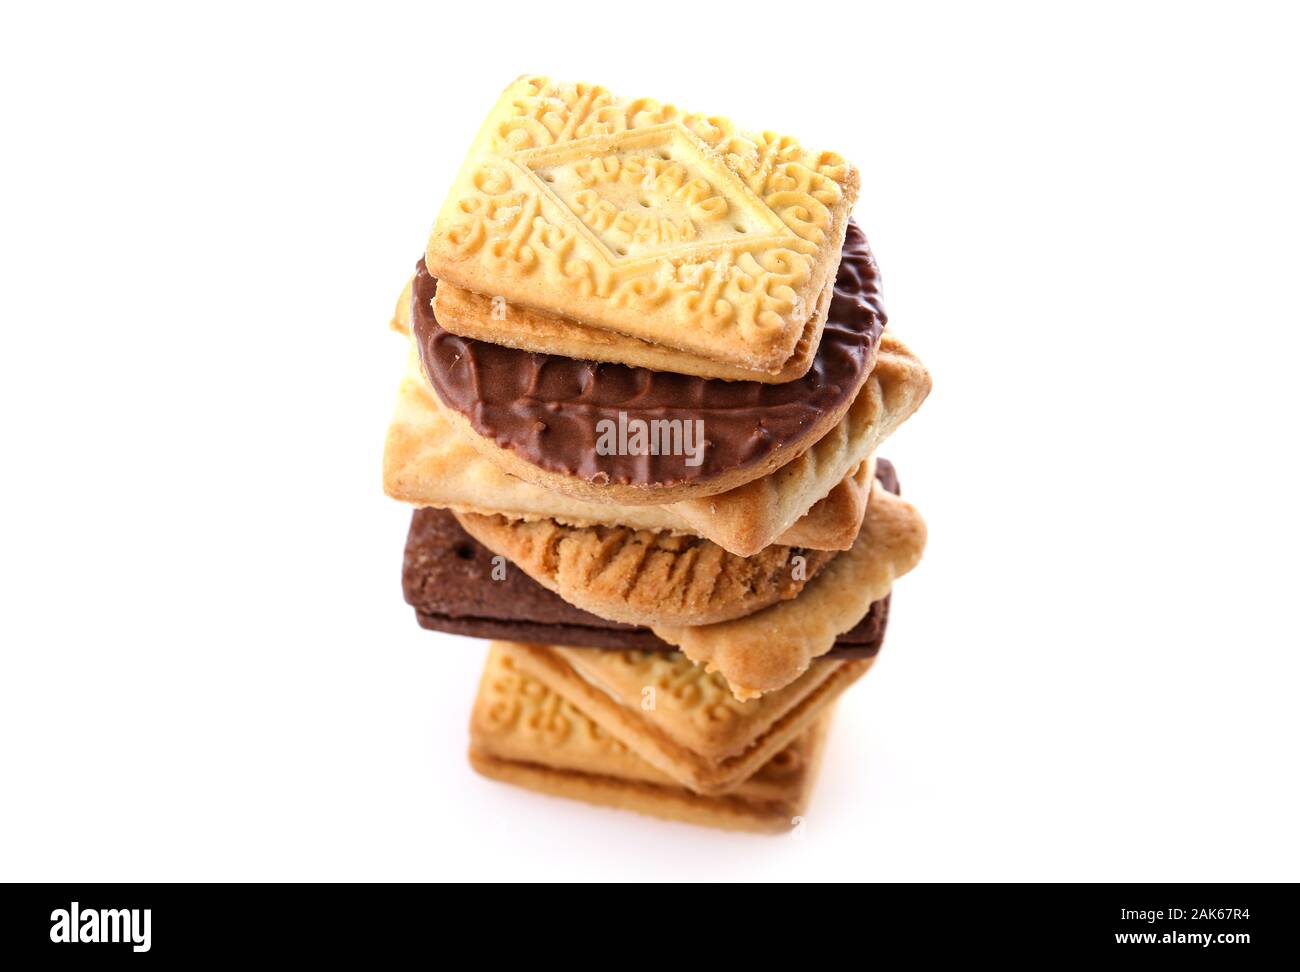 Pile of McVitie’s biscuits on a white background Stock Photo